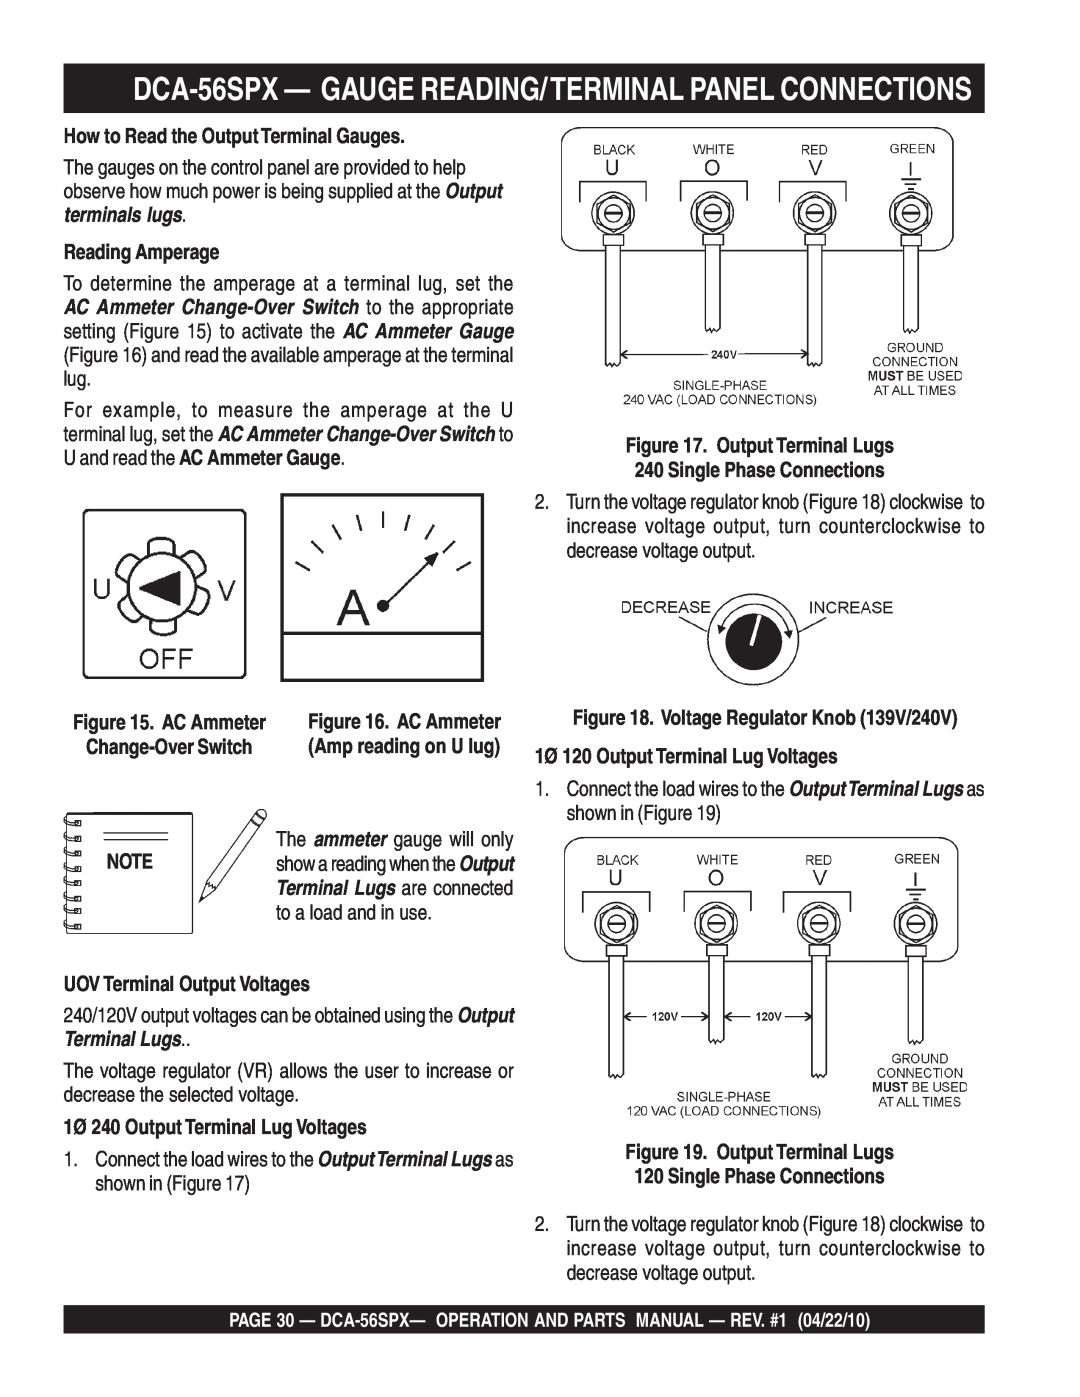 Multiquip DCA-56SPX operation manual How to Read the Output Terminal Gauges, Reading Amperage, Output Terminal Lugs 